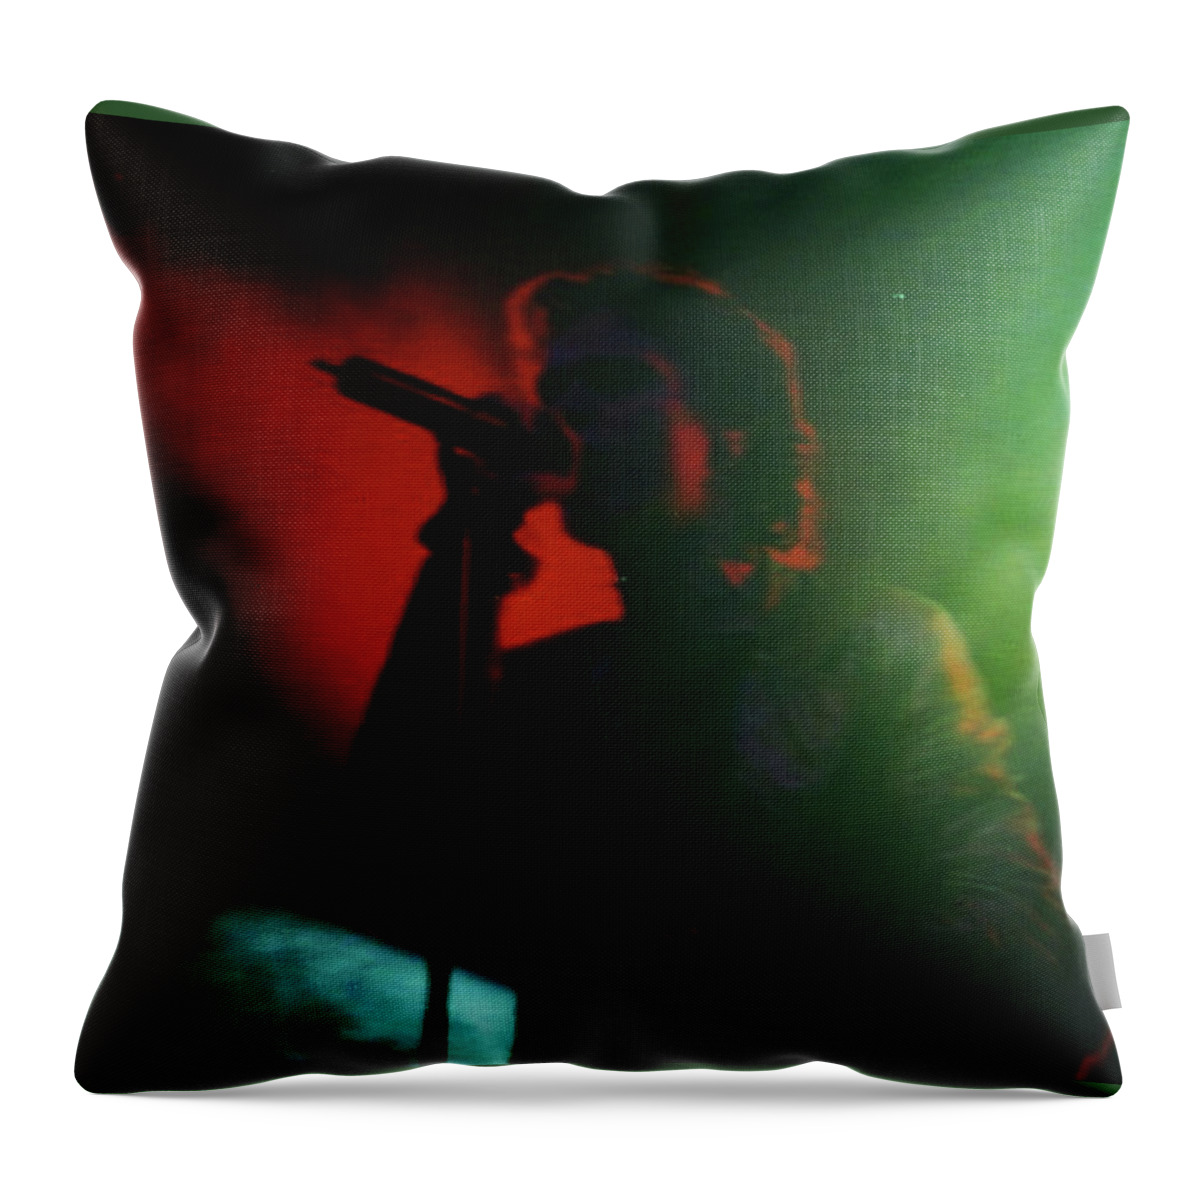 Chanteur Throw Pillow featuring the mixed media Singer by Joelle Philibert